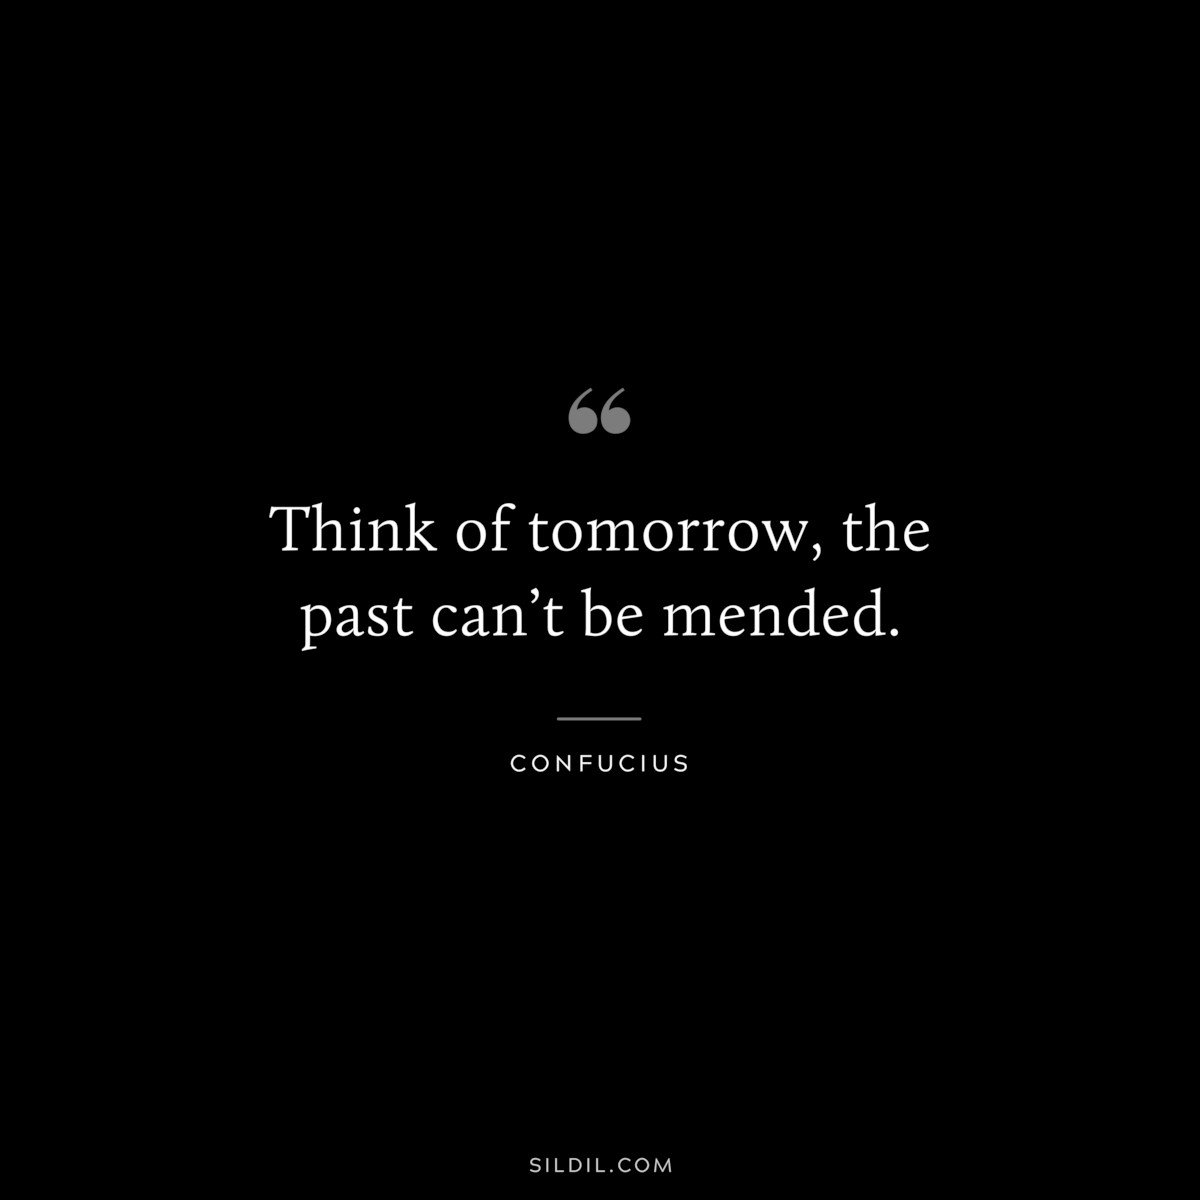 Think of tomorrow, the past can’t be mended. ― Confucius